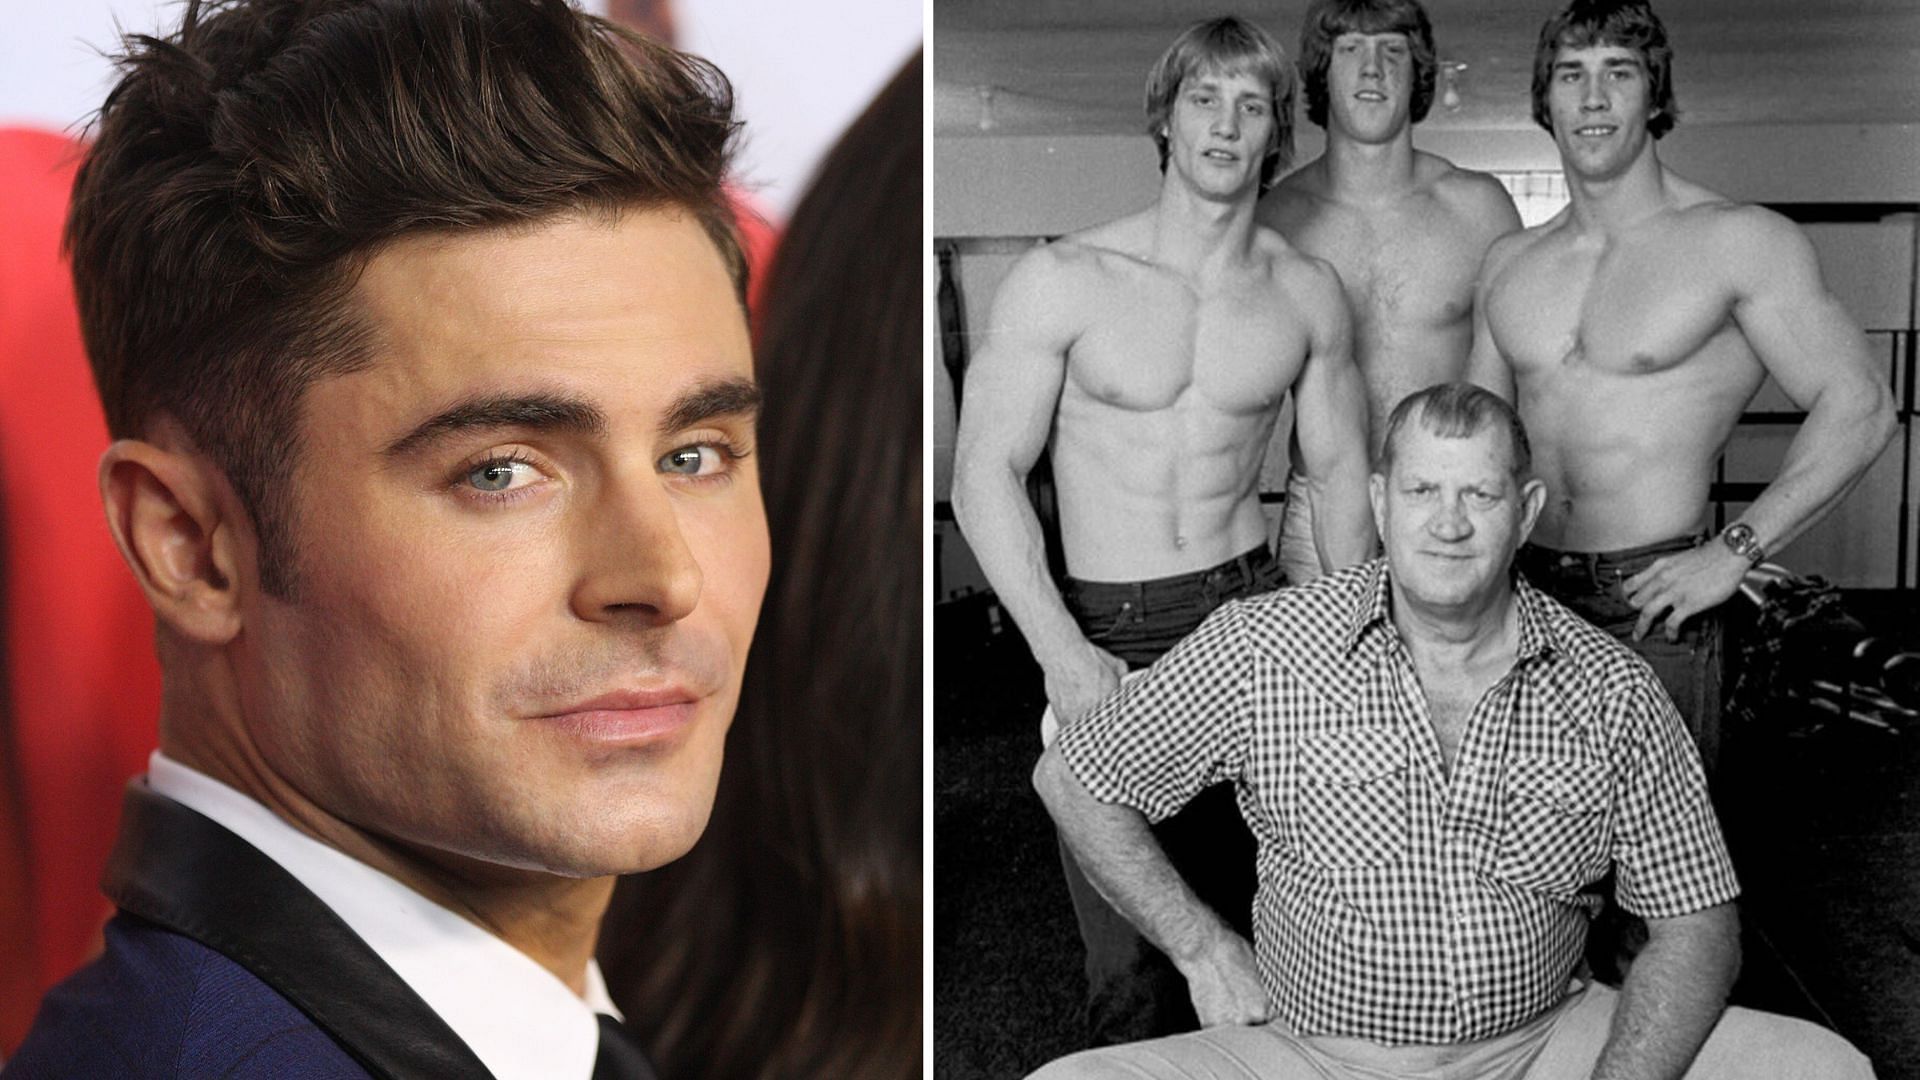 Zac Efron to star in a film based on the Von Erich family